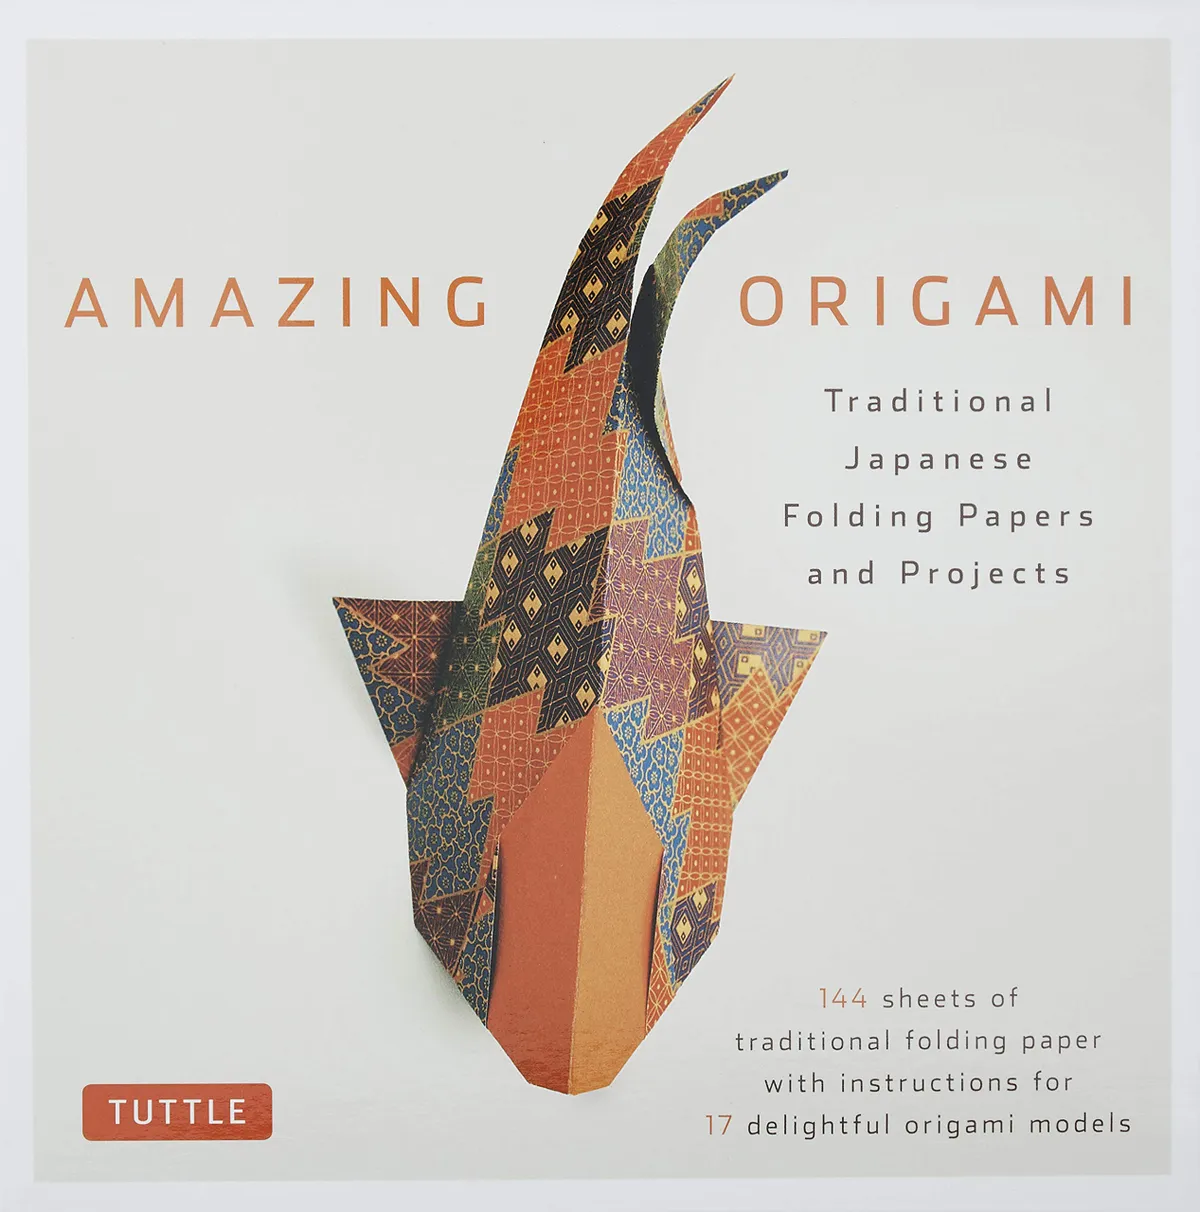 Origami Kit For Adults: Origami Kit Includes Origami Book, Easy Models With  Step-By-Step Instructions, Simple Projects Great For Both Adults And Kids